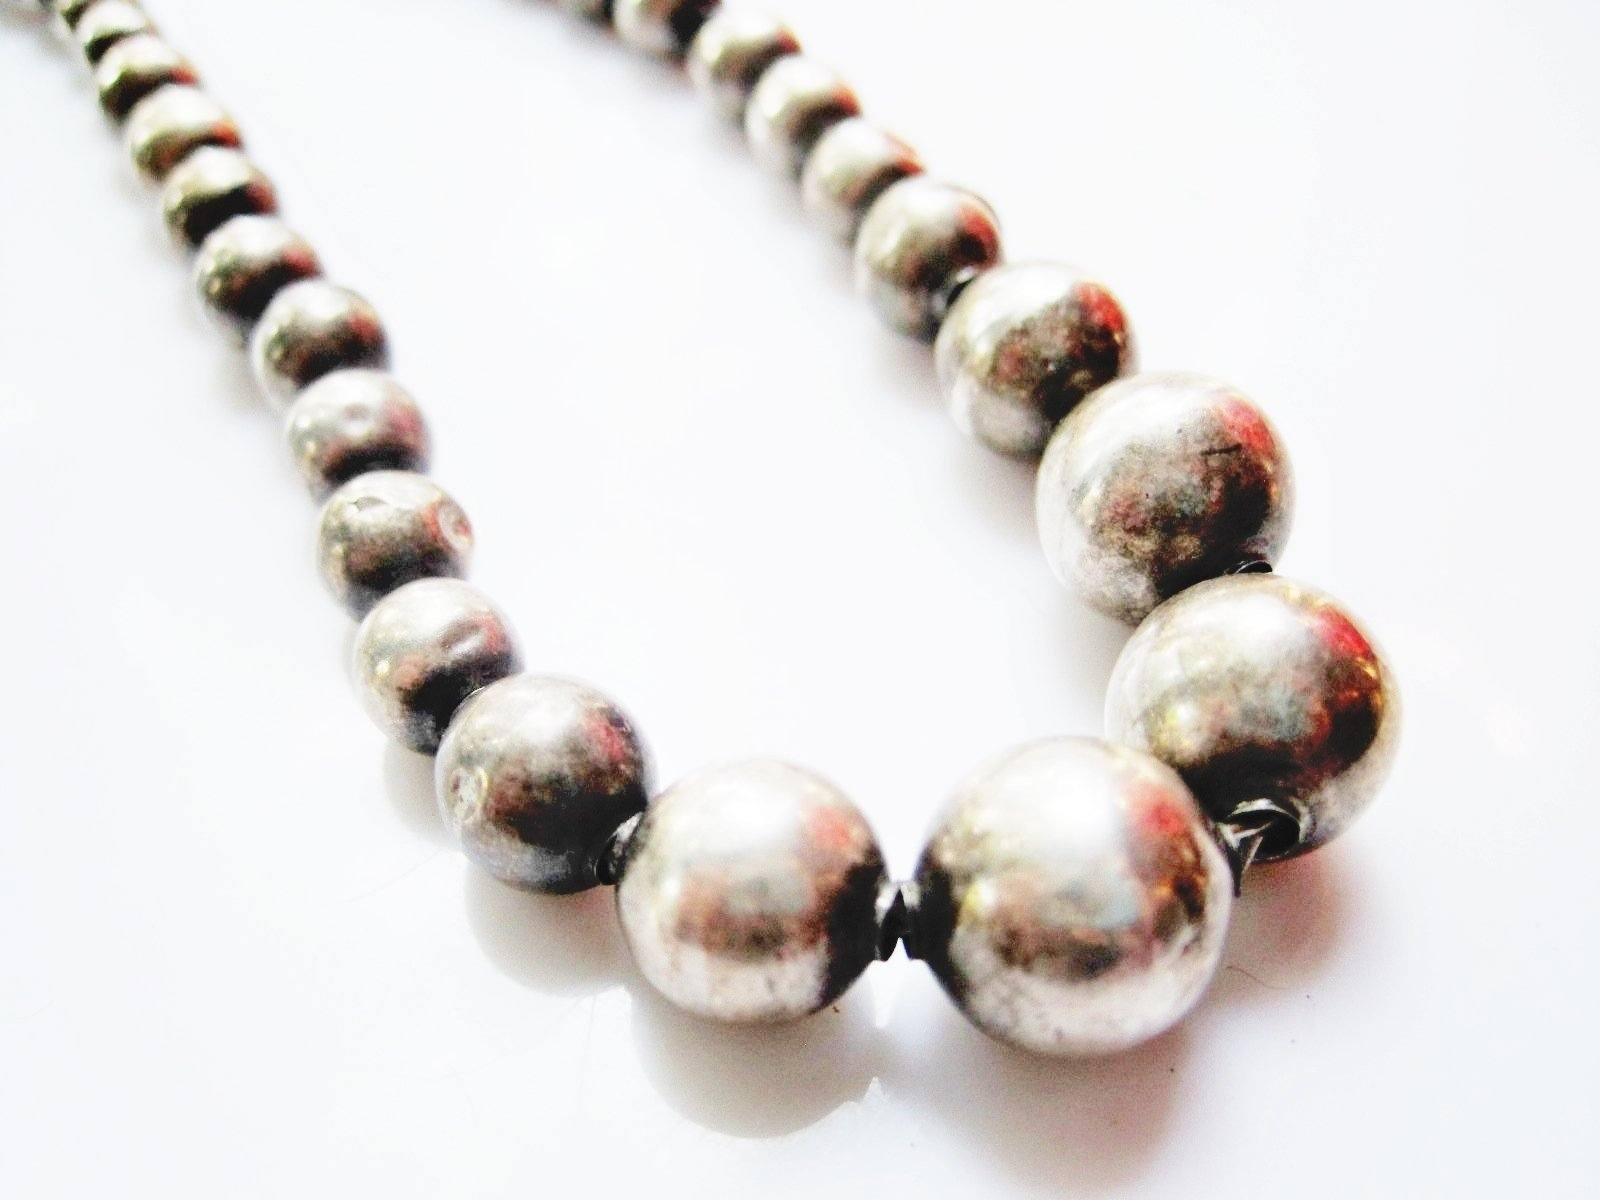 Vintage Silver Ball Necklace from Iguala, Mexico – Anteeka